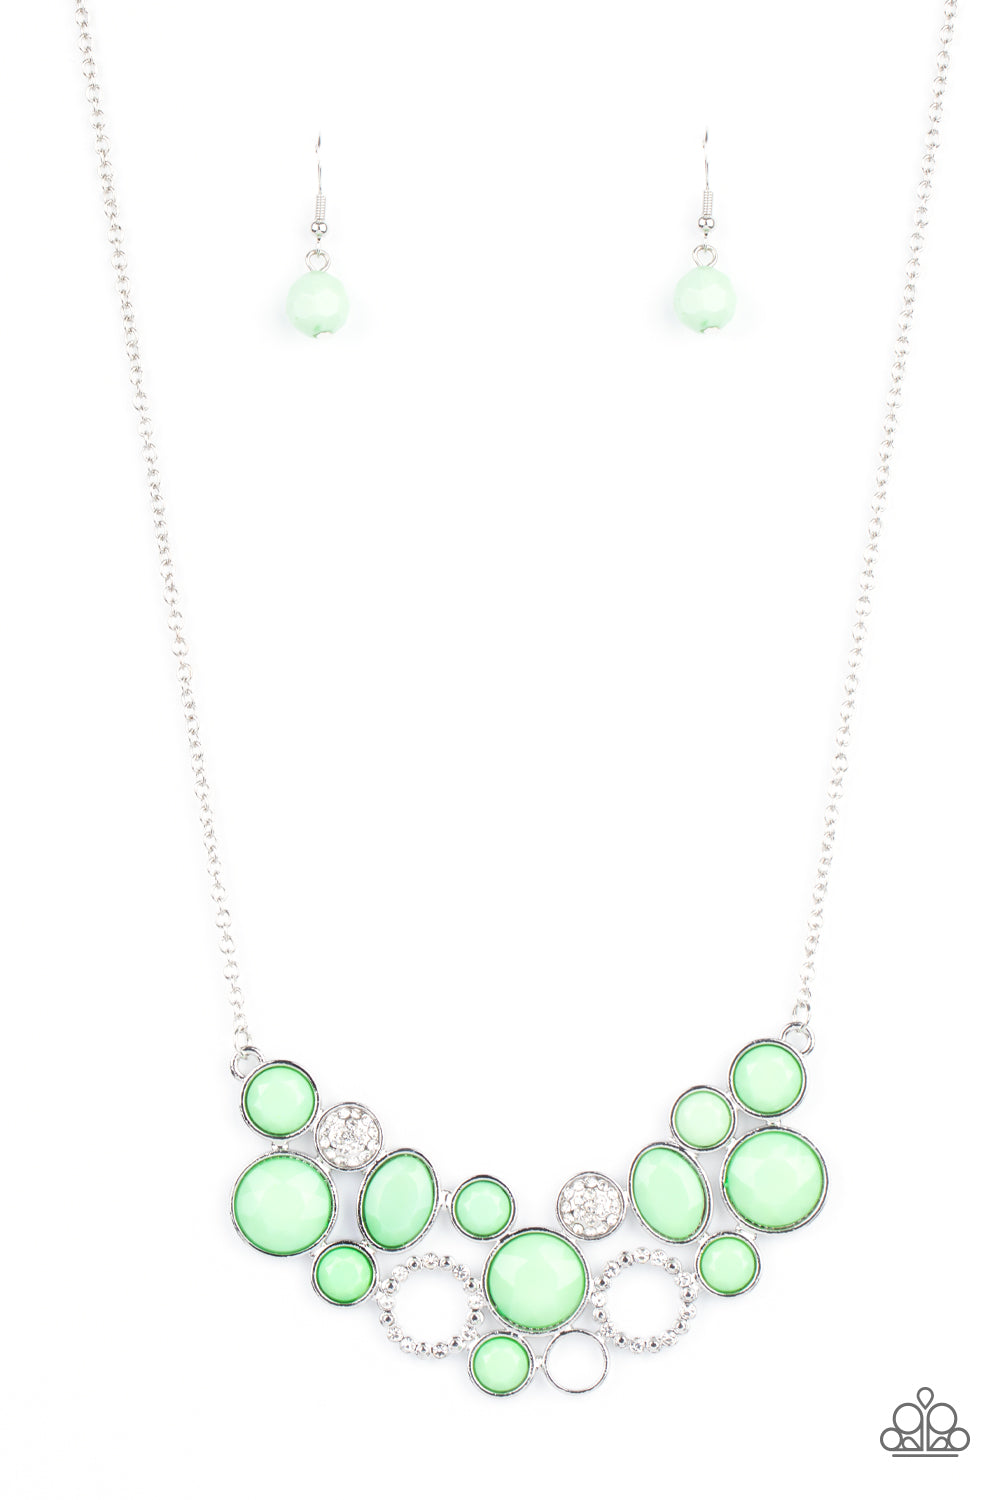 five-dollar-jewelry-extra-eloquent-green-necklace-paparazzi-accessories